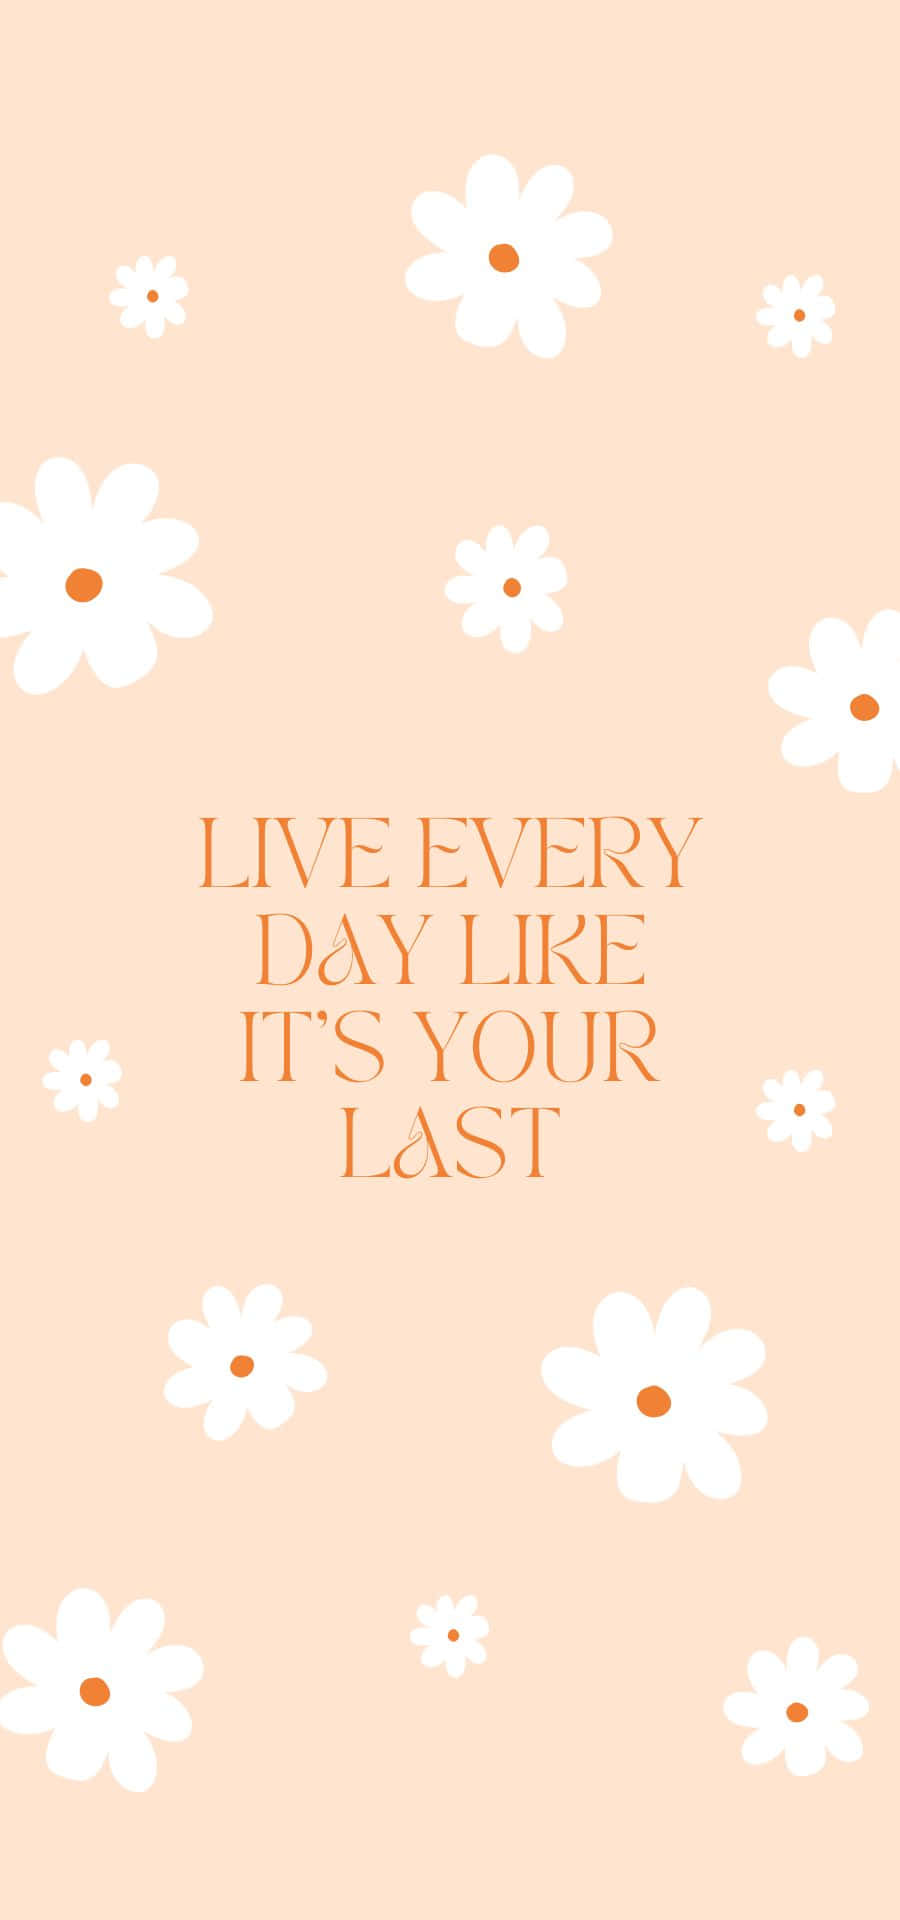 Live Every Day Life It's Your Last